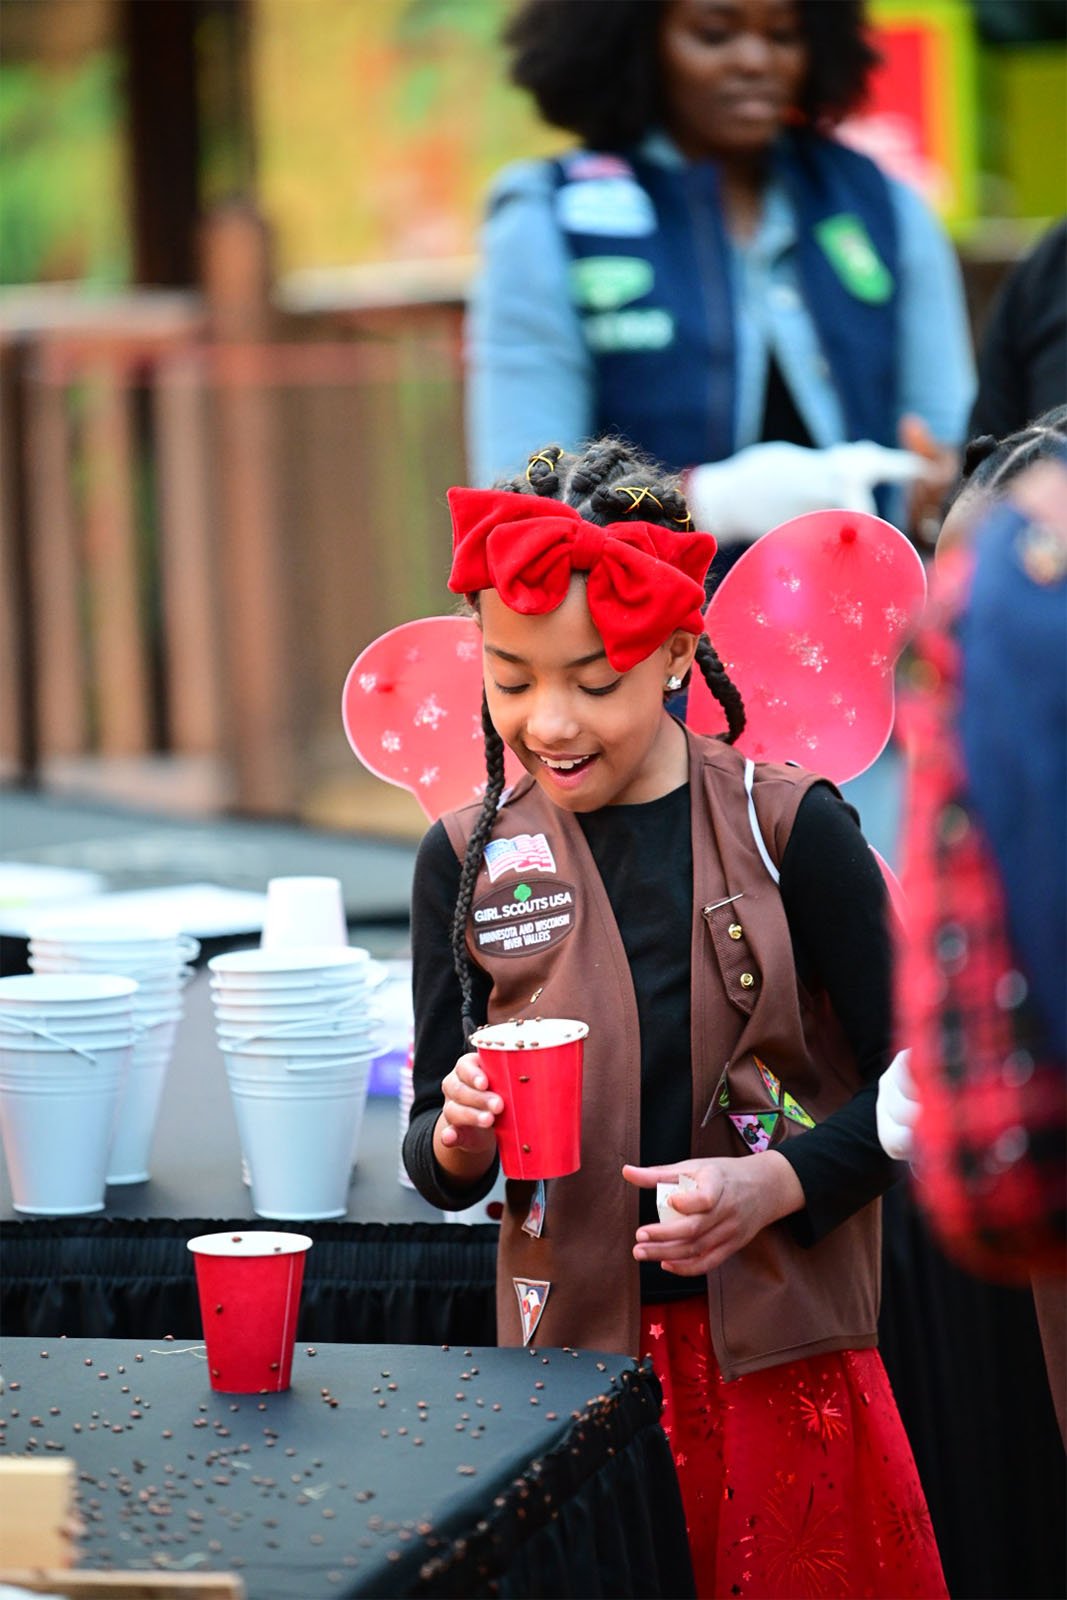 A young girl wearing a red headband and girl scouts vest smiles while holding a red cup at an outdoor event, with other people and a table with cups in the background.